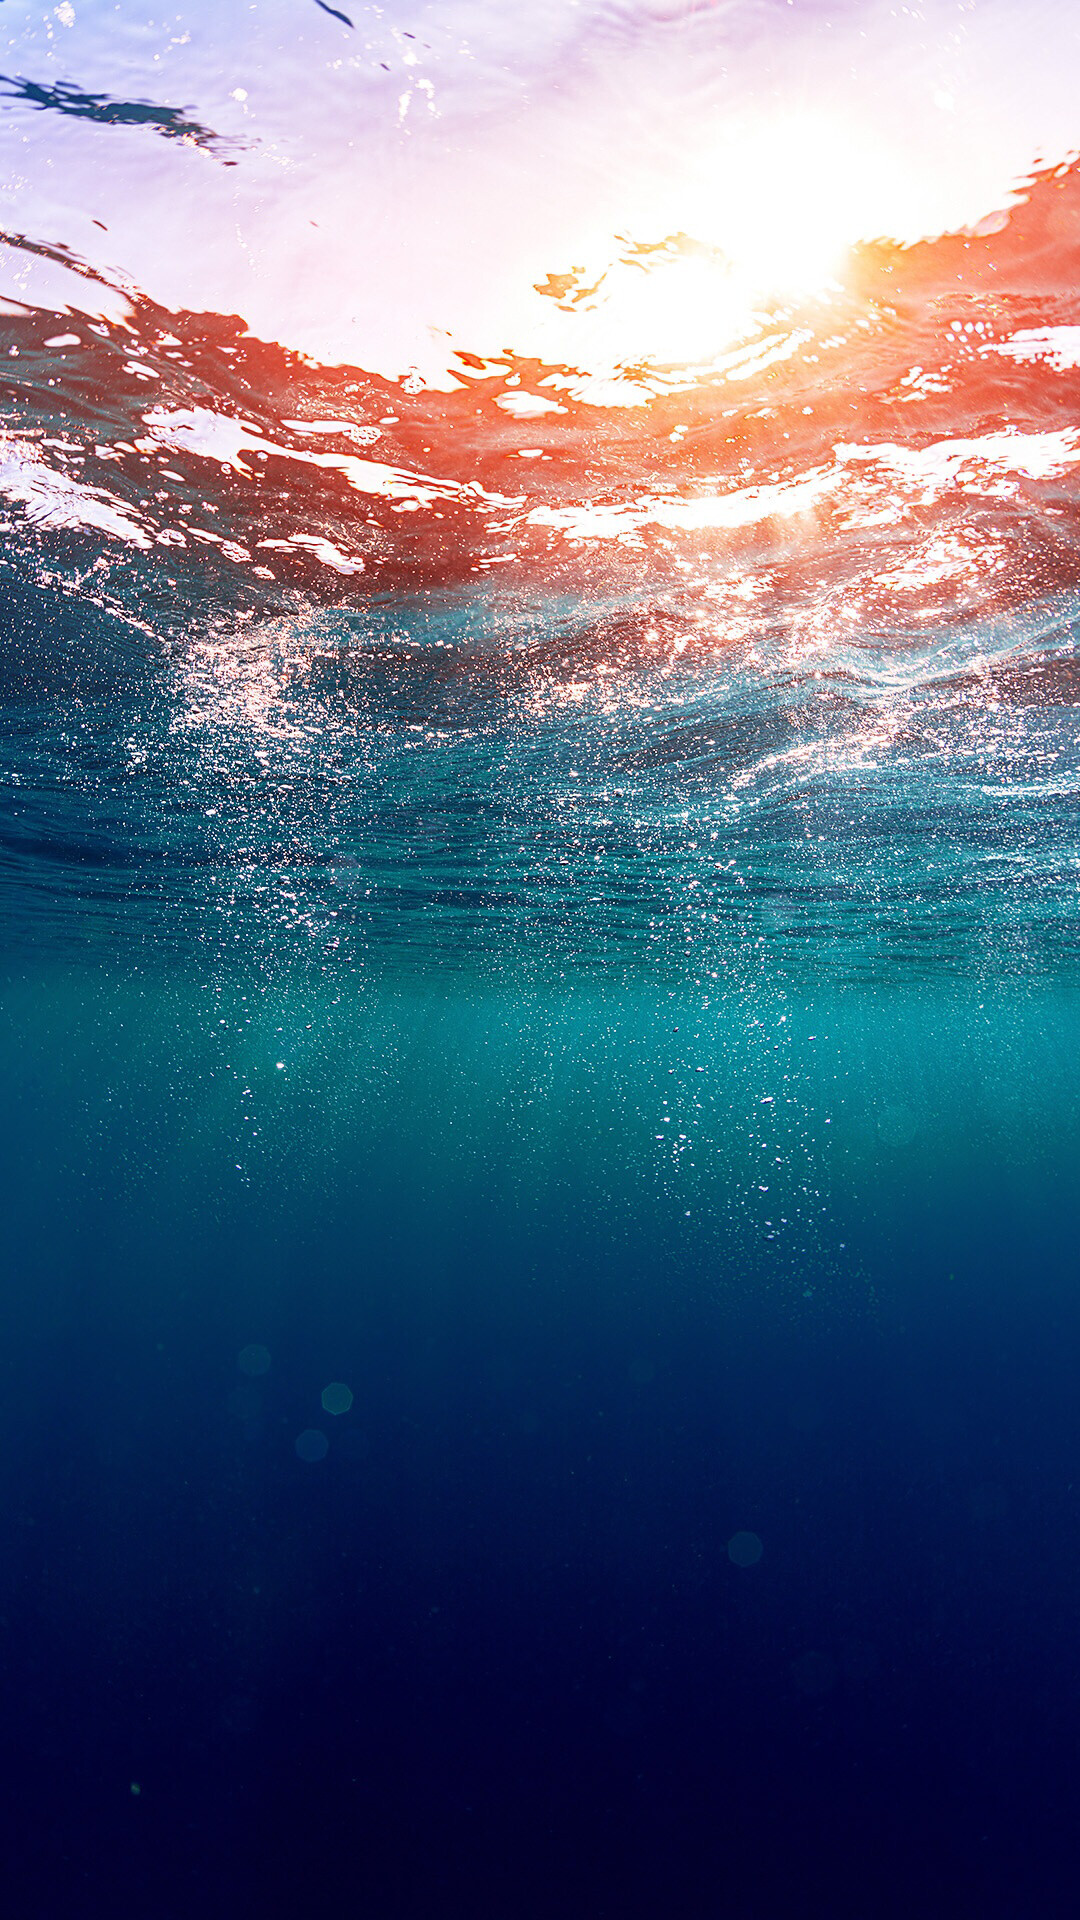 Ocean: Covers approximately 71% of the Earth’s surface, Water resources. 1080x1920 Full HD Wallpaper.